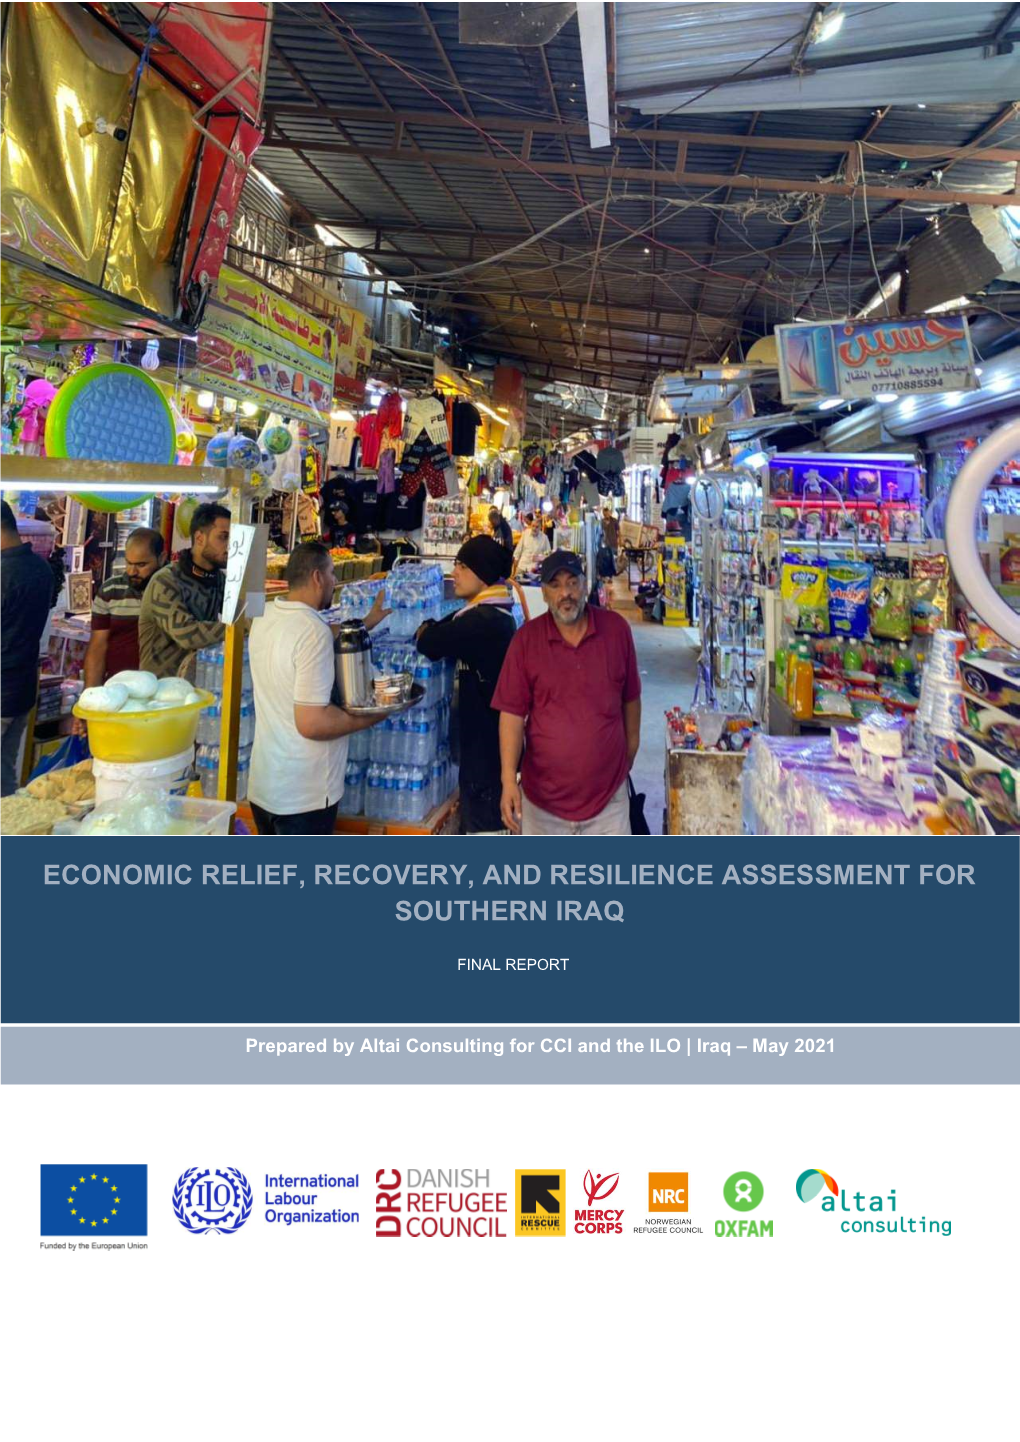 Economic Relief, Recovery, and Resilience Assessment for Southern Iraq